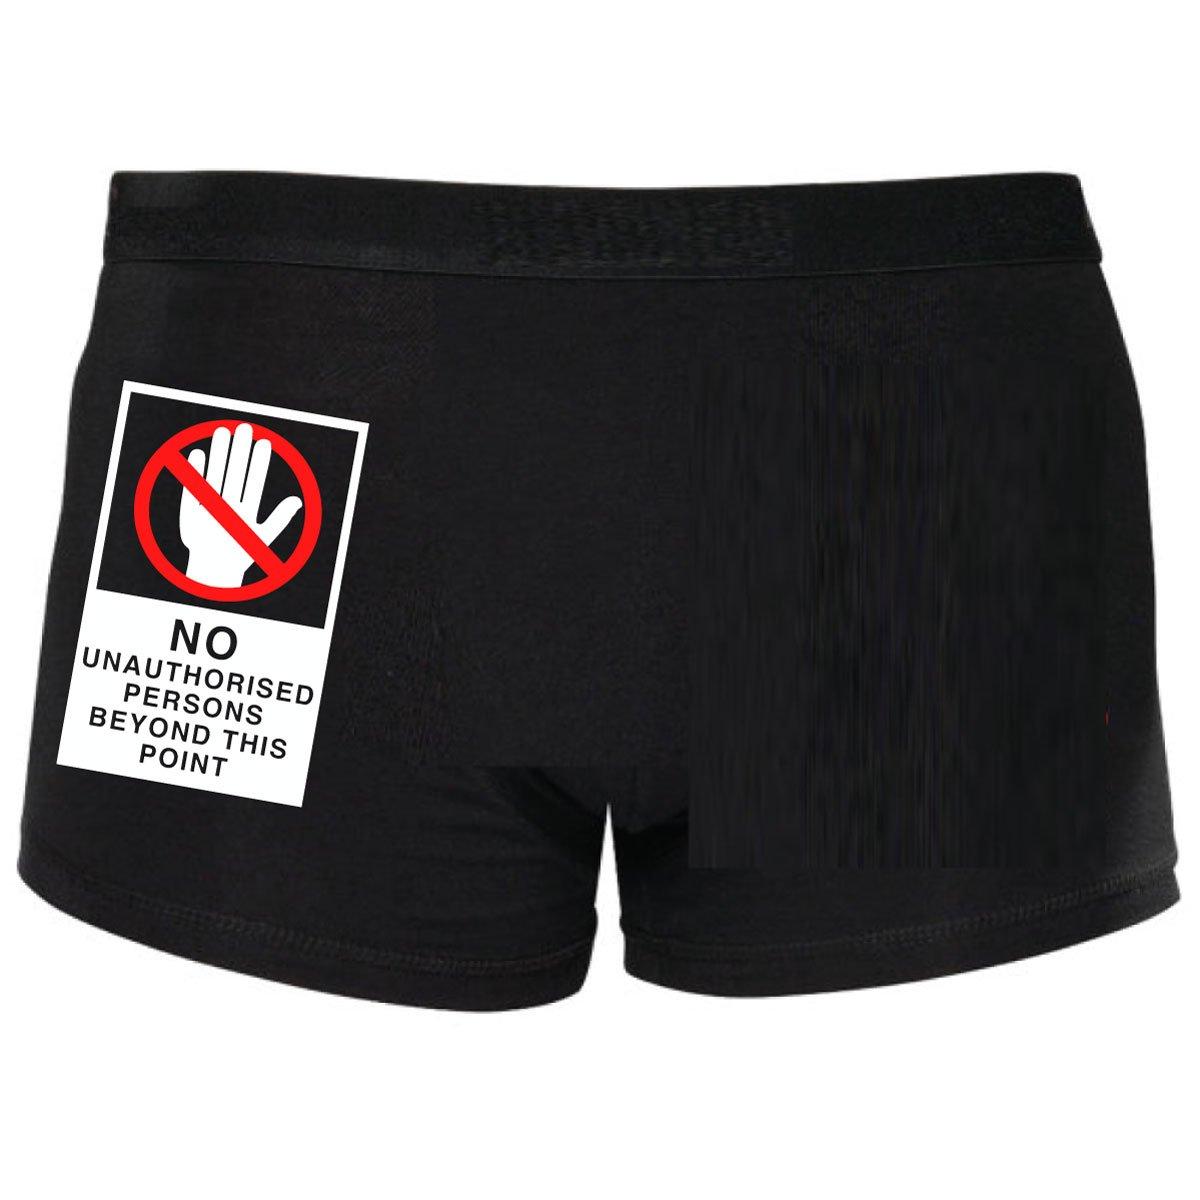 Funny Boxers No Unauthorised Access Shorty Boxers